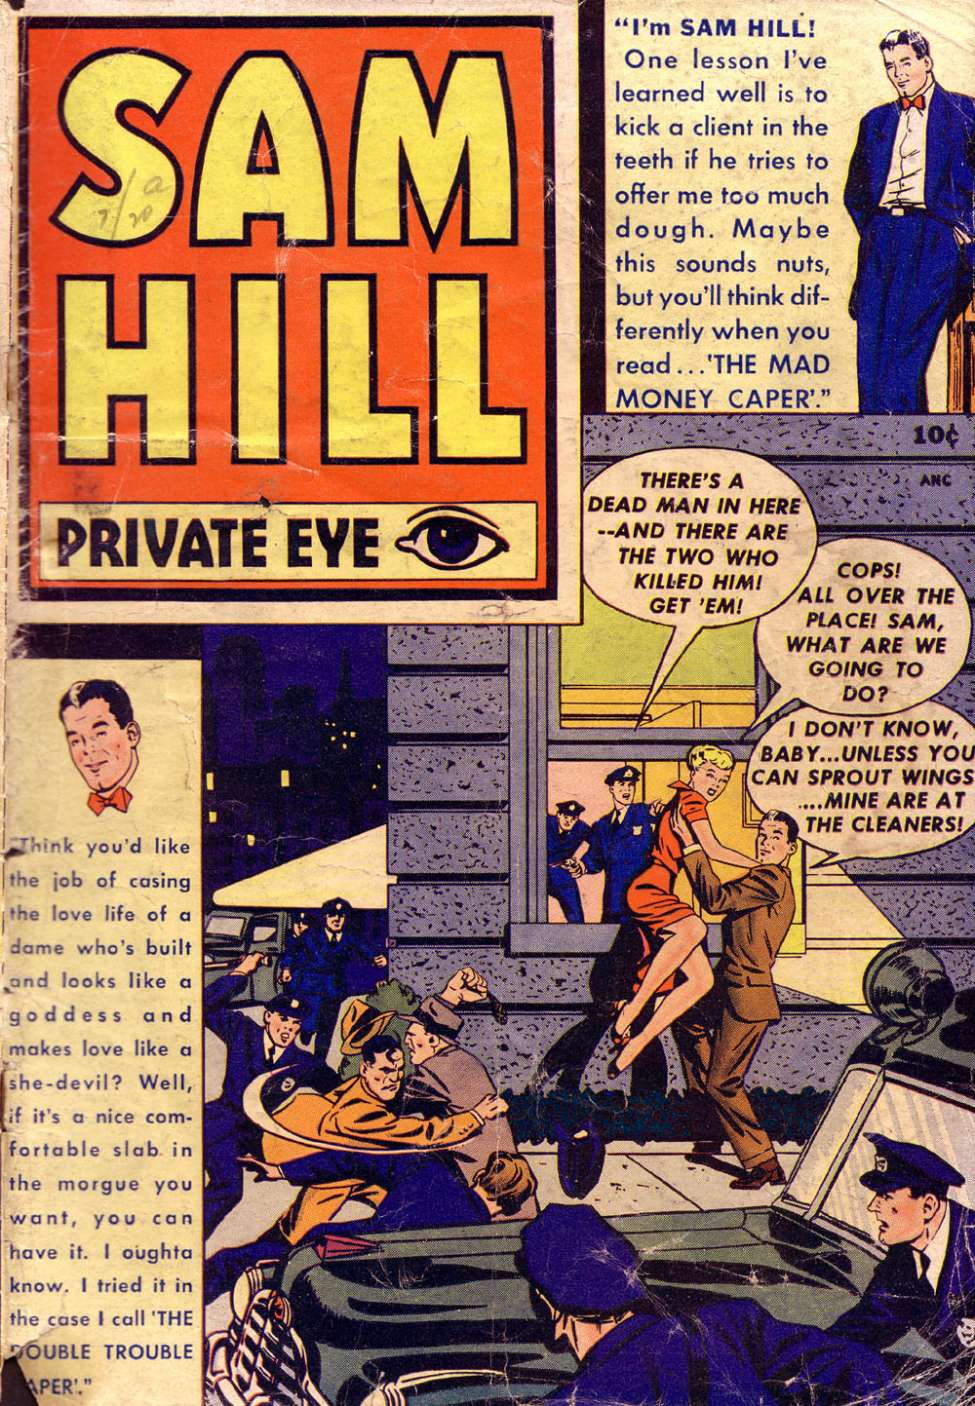 Book Cover For Sam Hill Private Eye 1